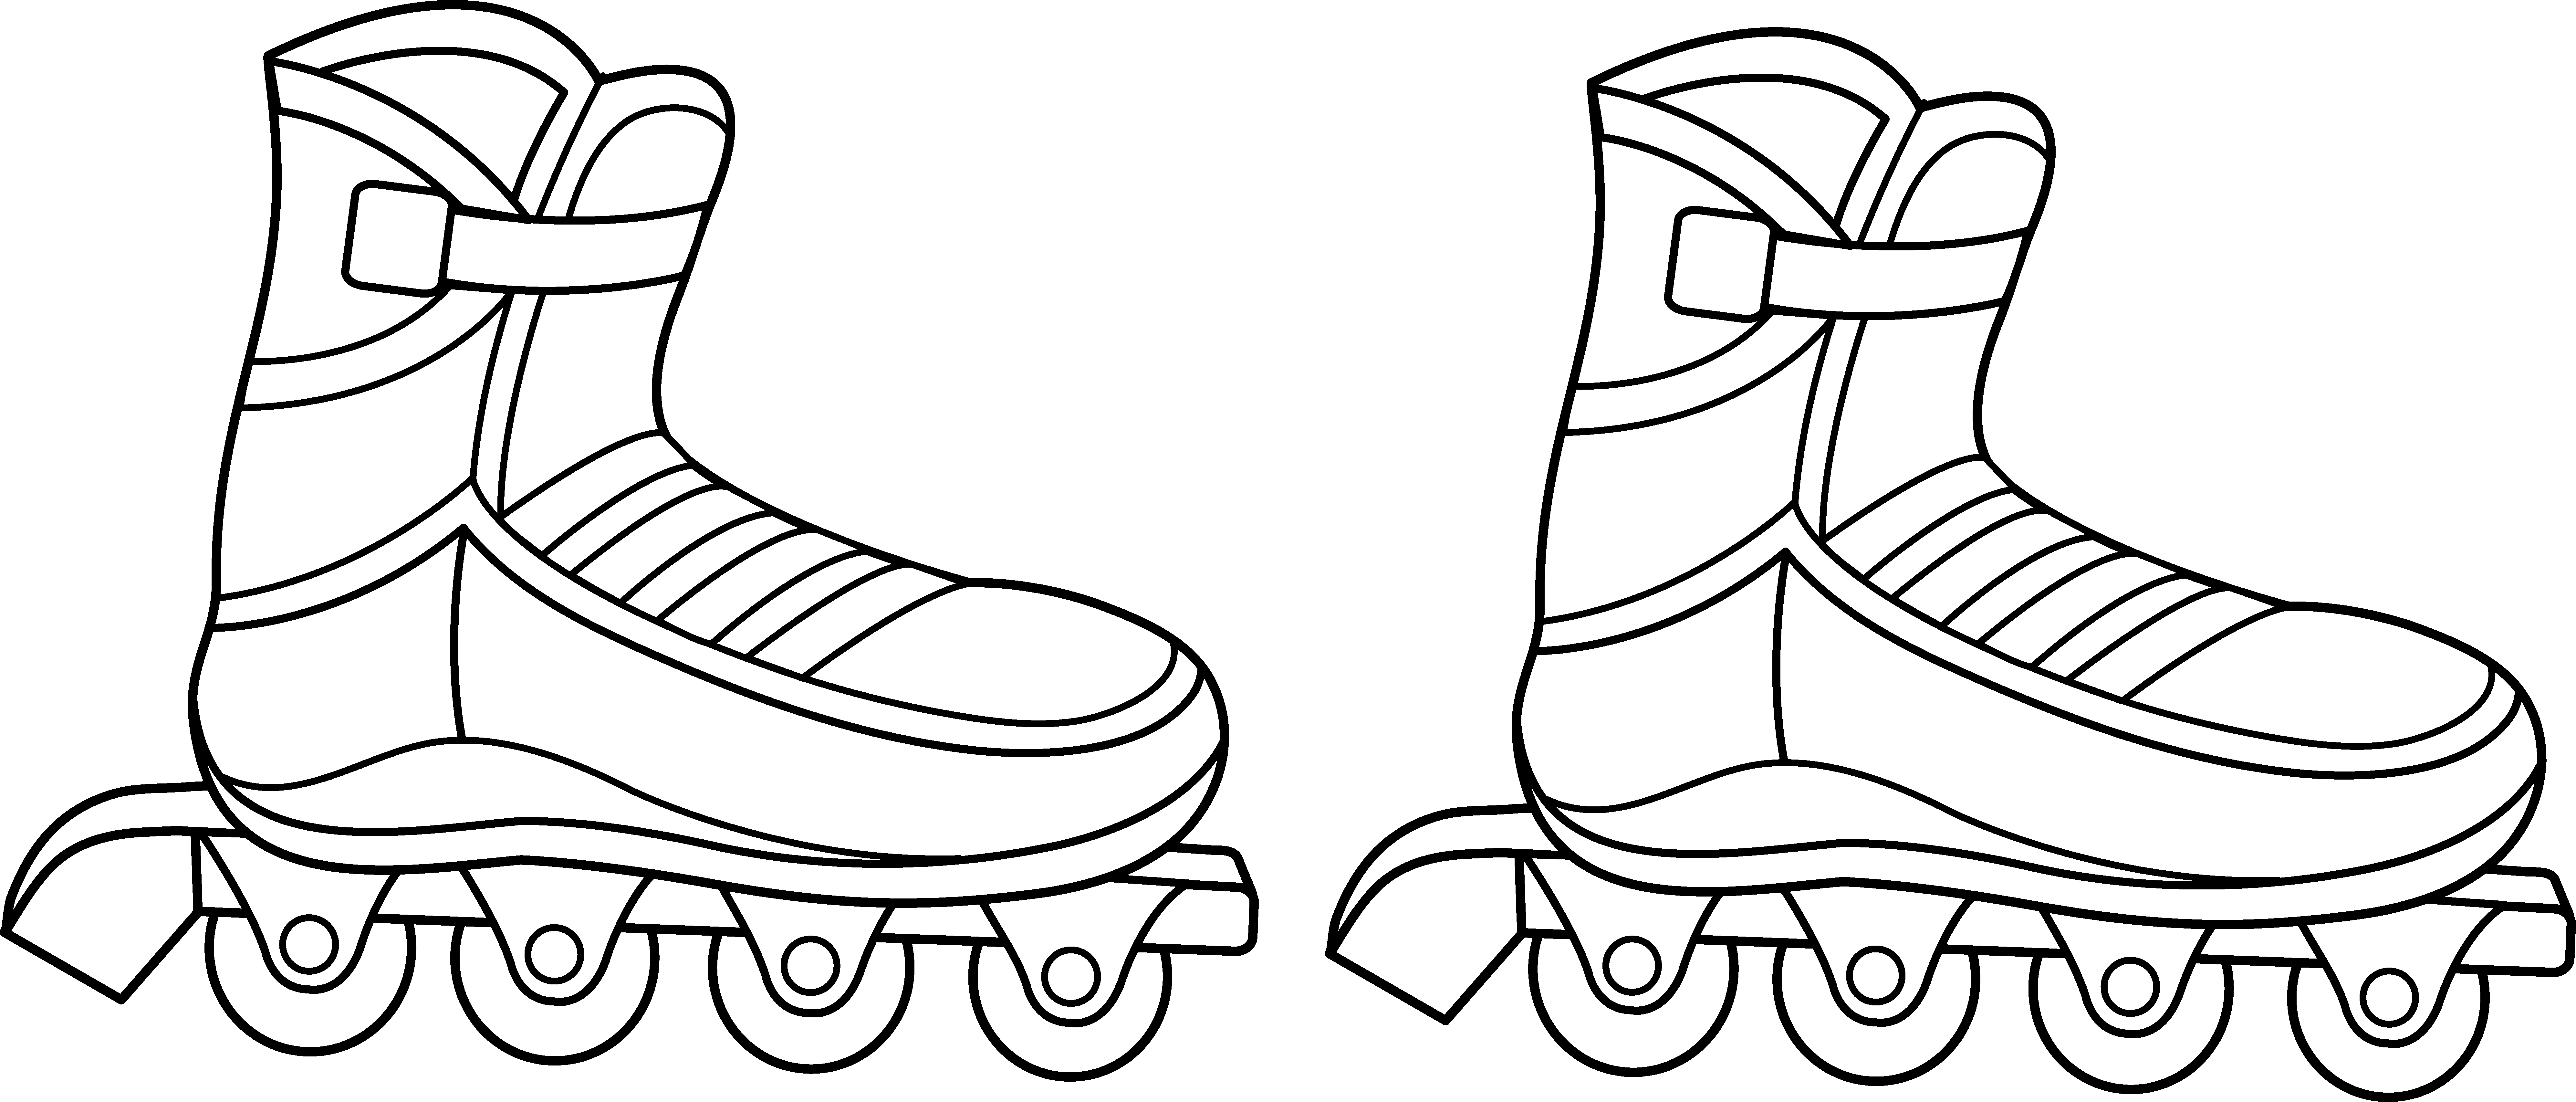 Rollerblade Images Cliparts.co